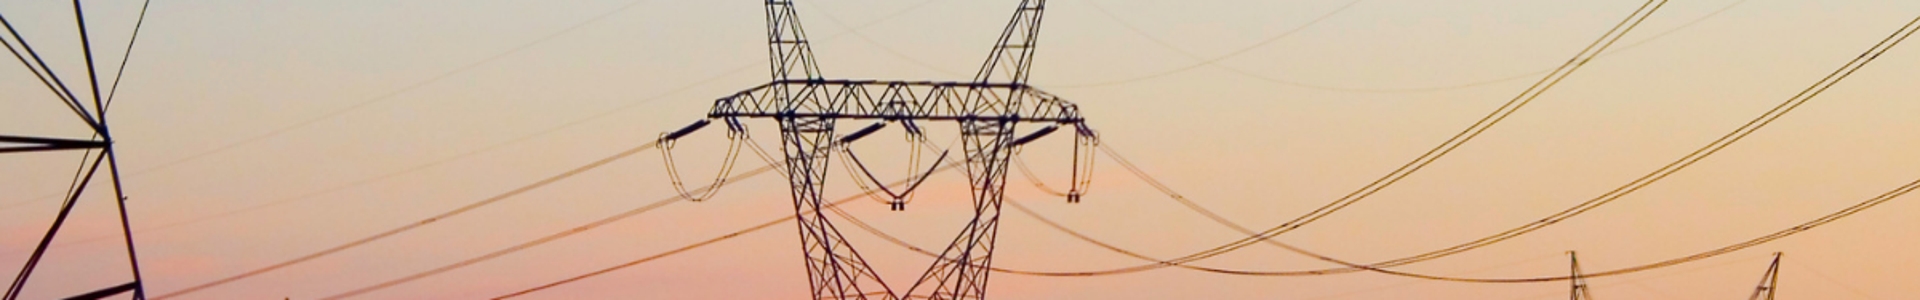 Electricity pylons at sunset distributing energy across the UK from renewable sources